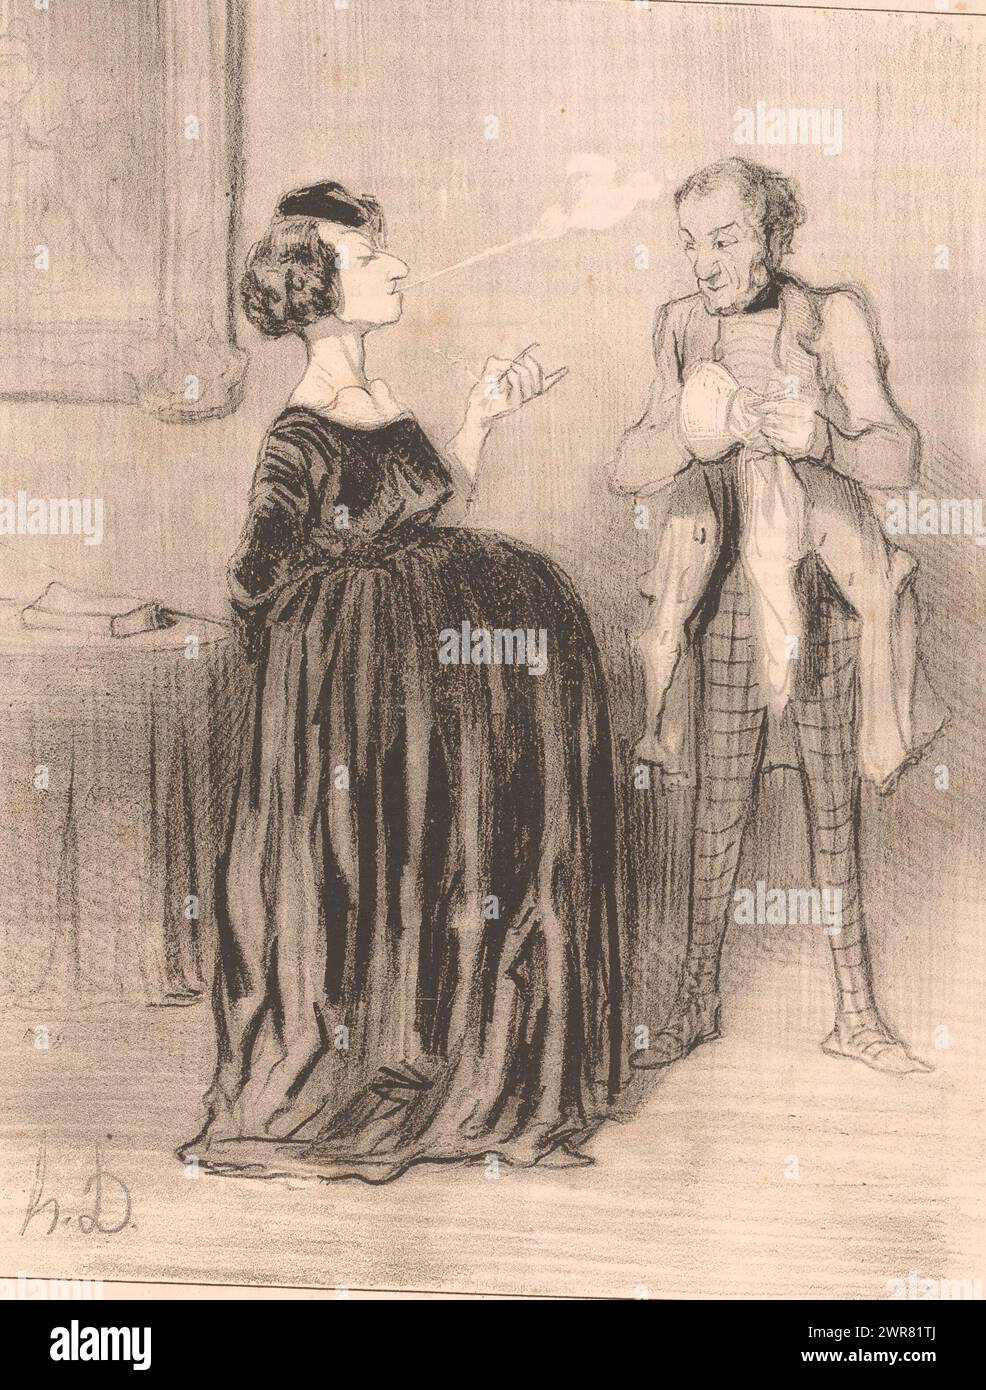 Caricature of a pregnant woman with her husband, Dis donc... mon mari (...) (title on object), Pedantic women (series title), Les Bas-Bleus (series title on object), While smoking a cigarette the woman tells her husband, who is polishing or drying an object with a cloth, what names she has in mind for her book and for her child. However, she will not decide anything before consulting her employee., print maker: Honoré Daumier, printer: Aubert & Cie., publisher: Aubert & Cie., Paris, 1844, paper, height 363 mm × width 242 mm Stock Photo